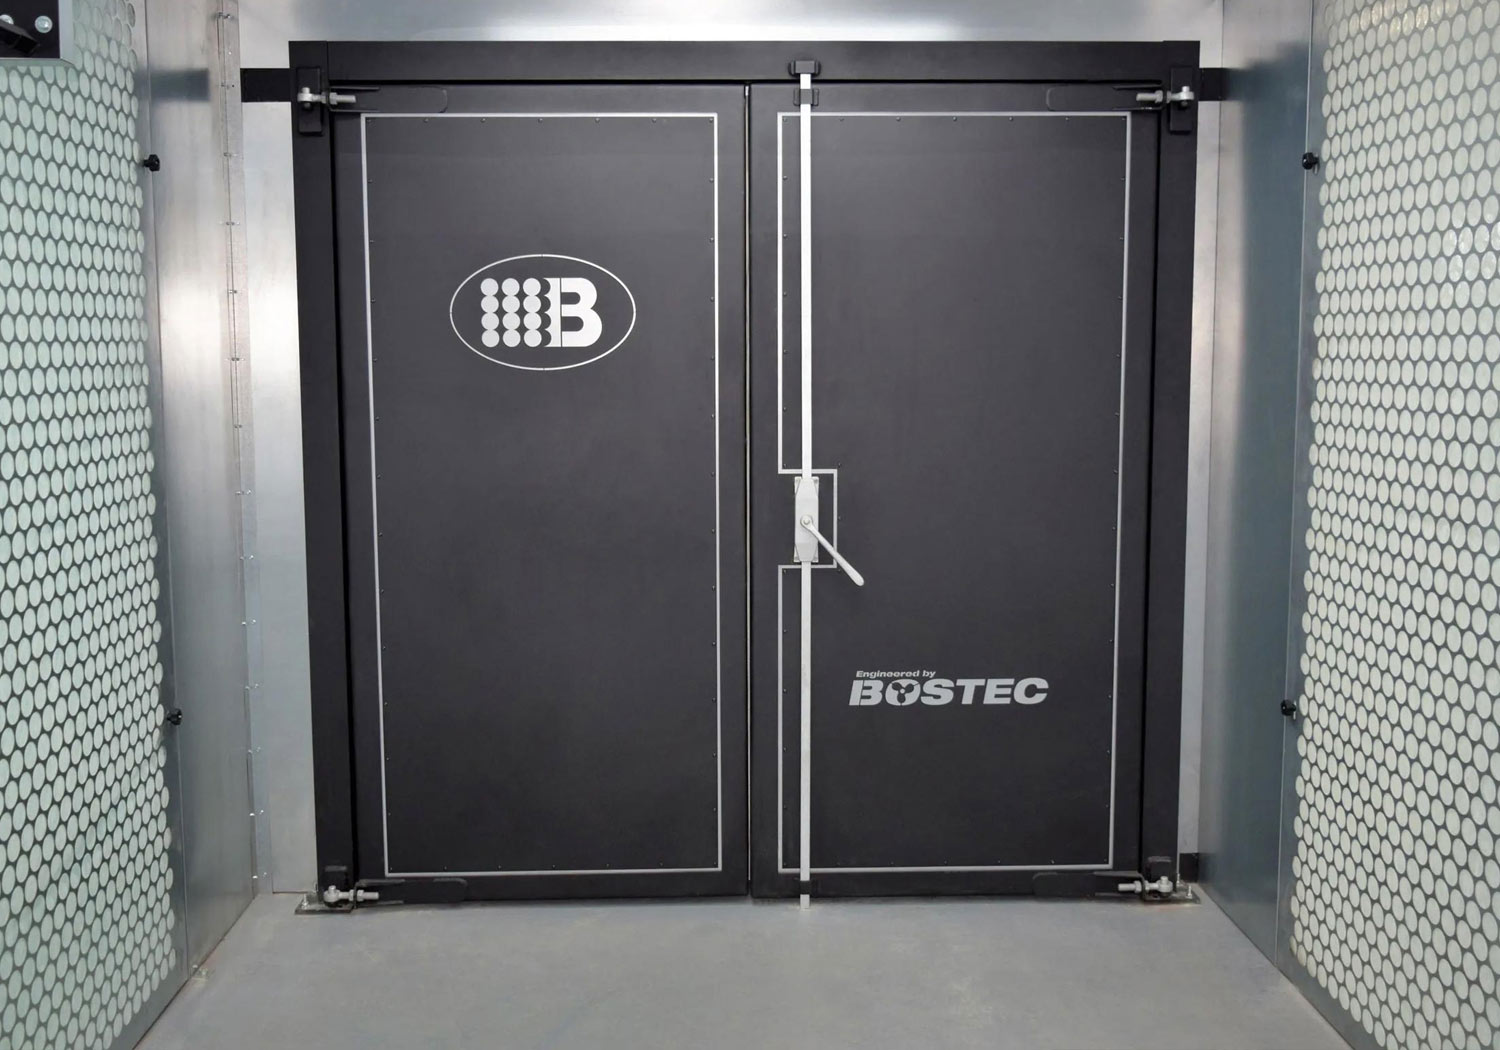 Manufacturers of Product Finishing Solutions - Bostec